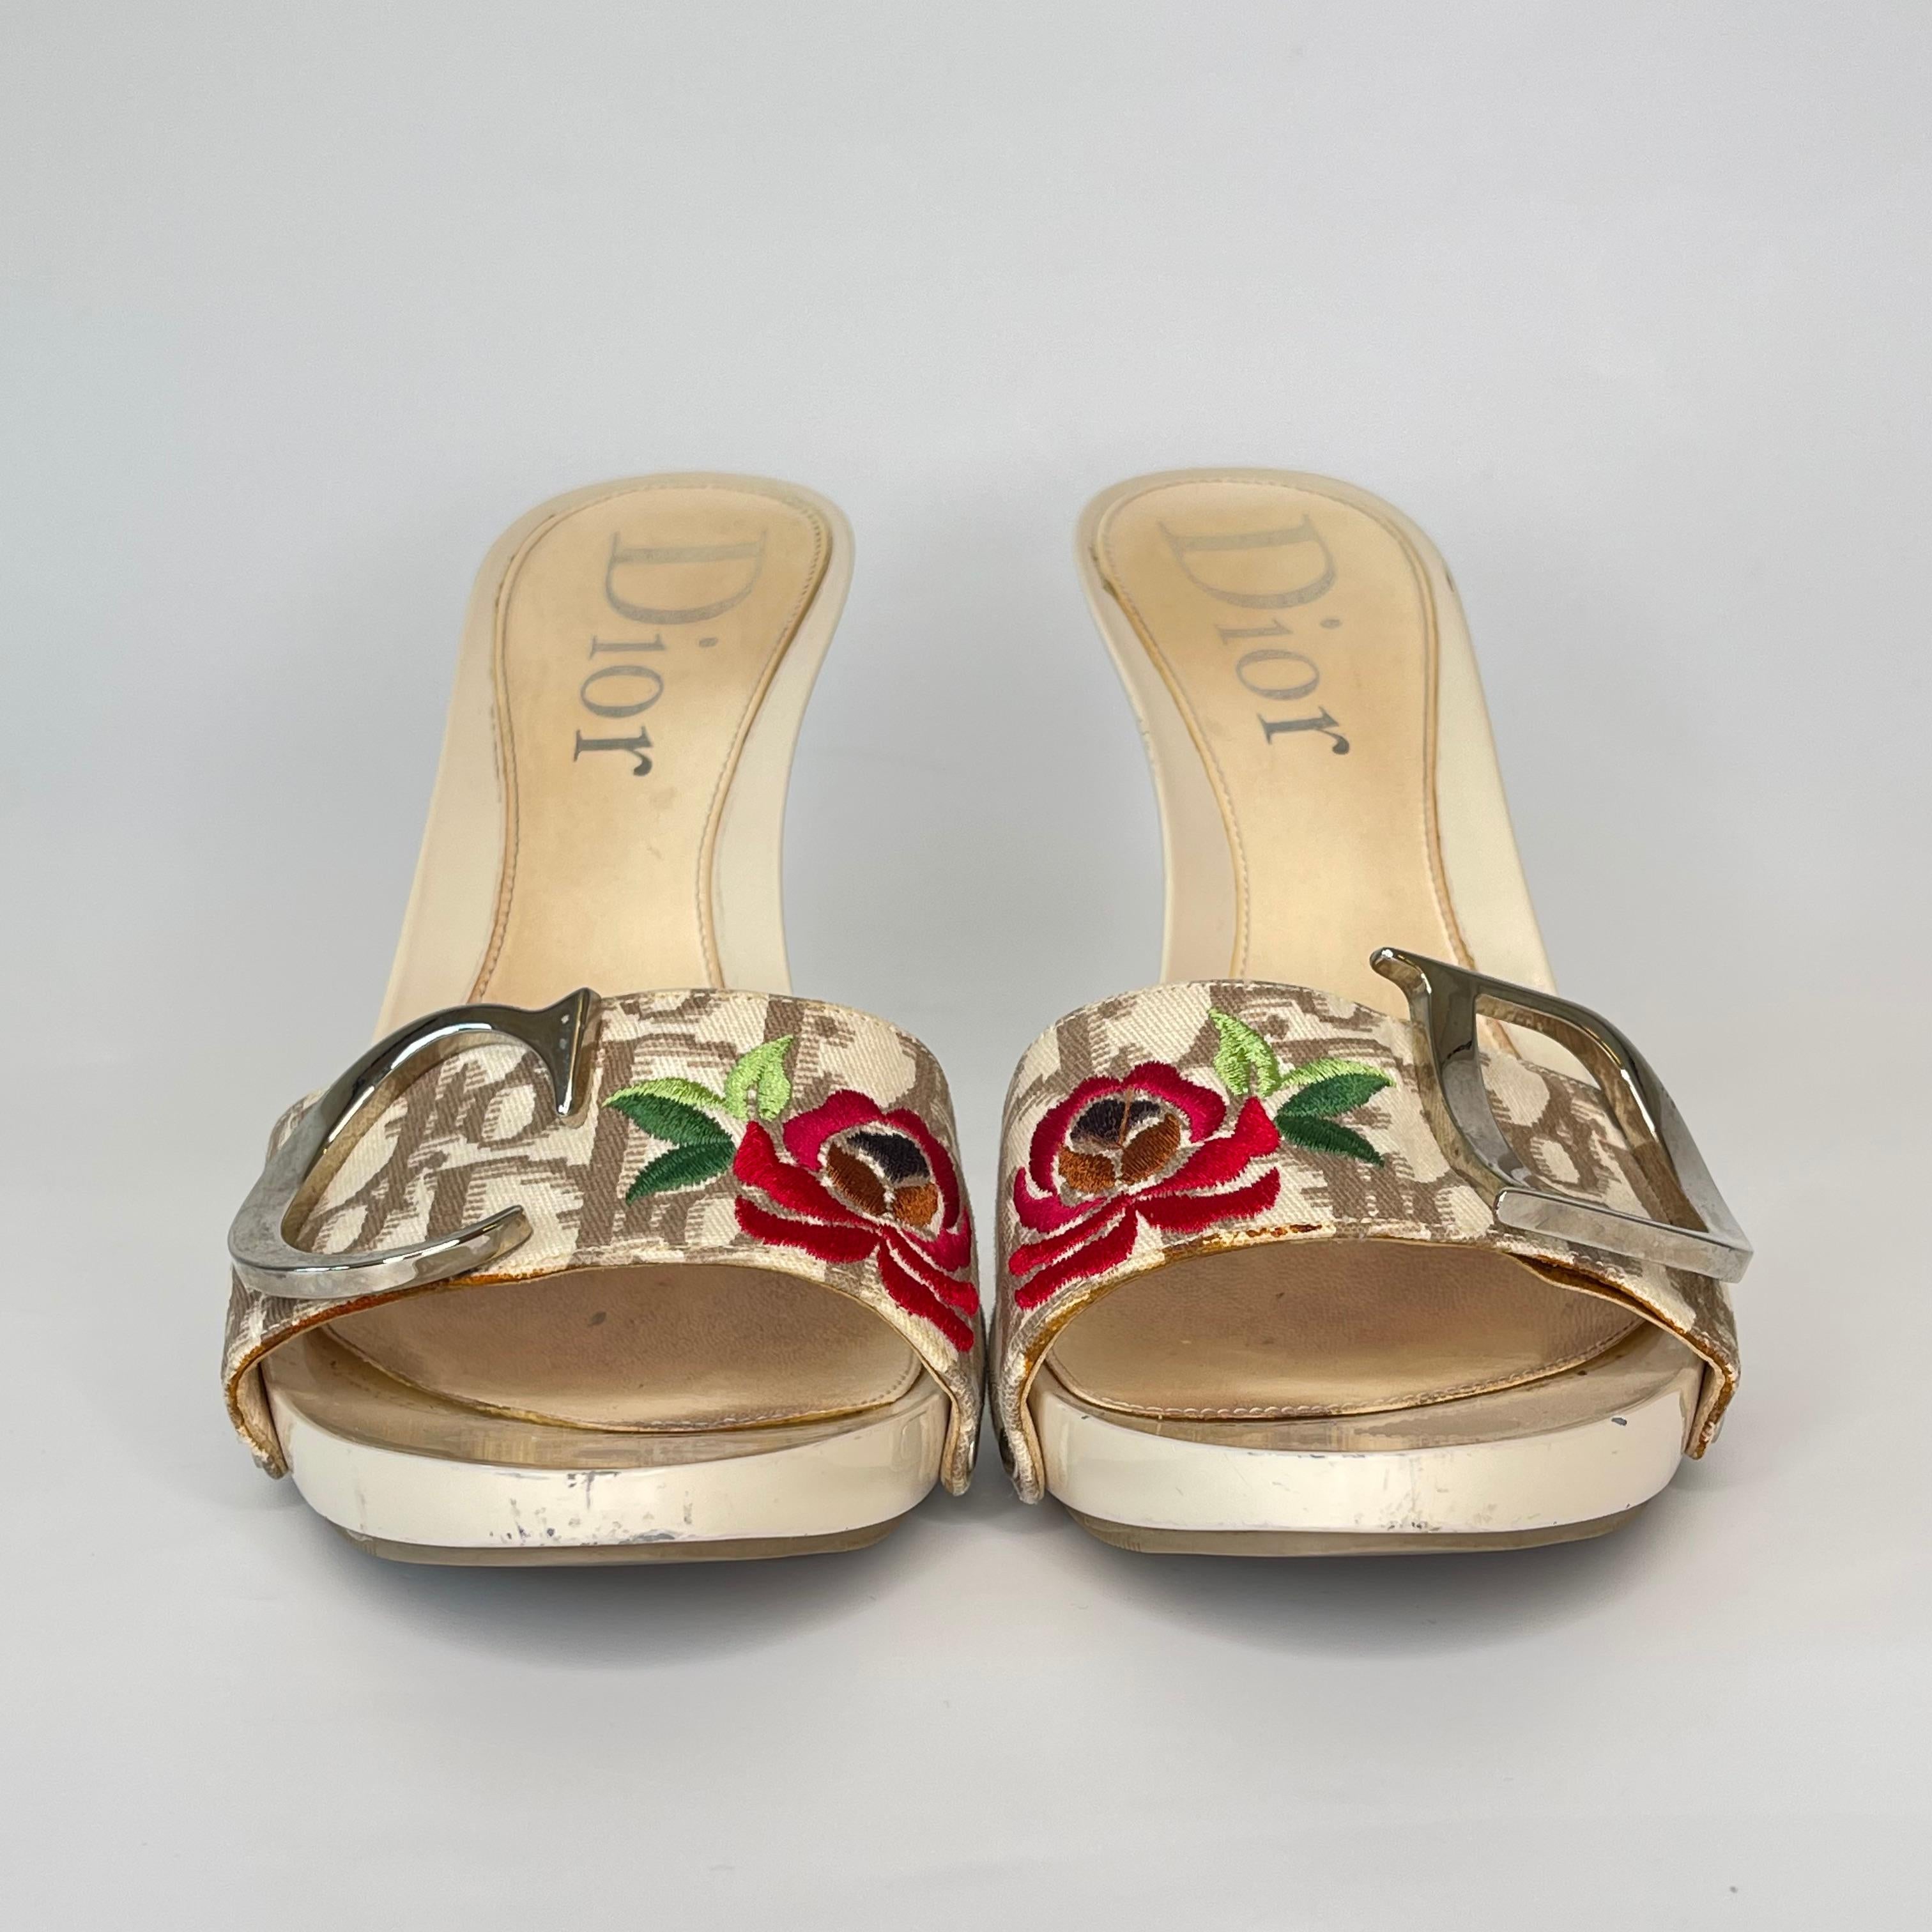 Dior pumps by John Galliano feature hard plastic in beige uppers, an oblique sandal strap with red flower, rubber soles and CD charms at the front.

COLOR: Beige
MATERIAL: Plastic
SIZE: 37.5 EU / 6.5 US
HEEL HEIGHT: 80 mm (3 inch)
CONDITION: Fair -